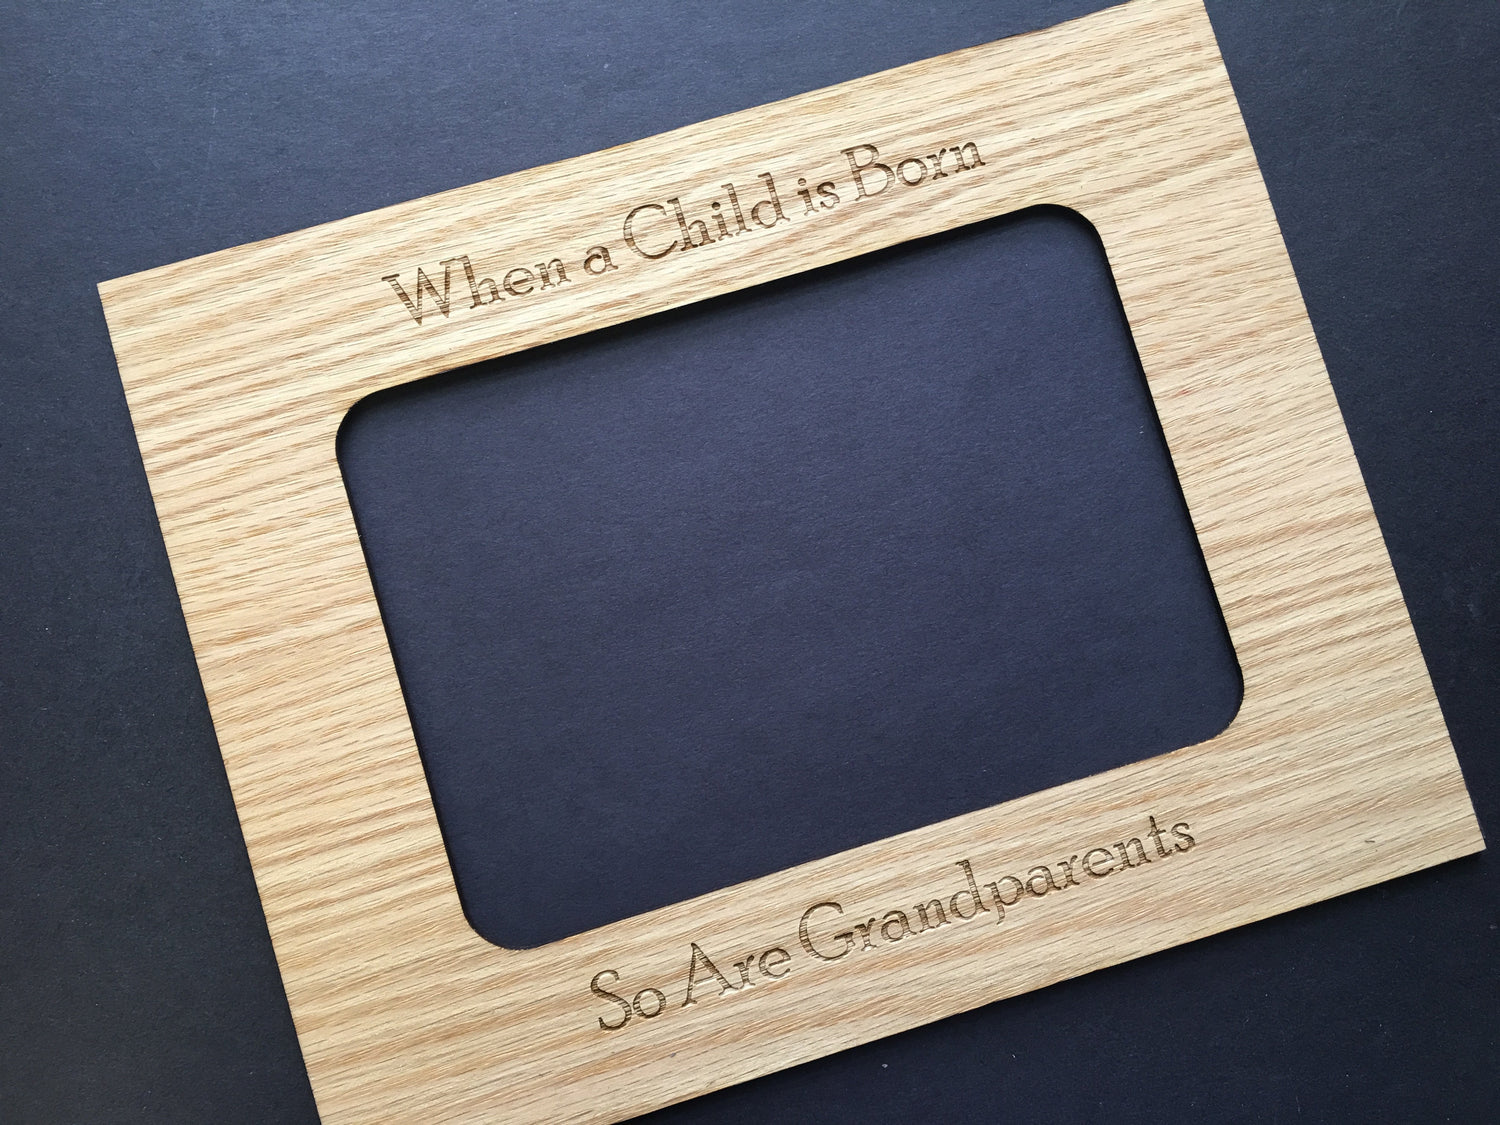 8x10 When a Child is Born Picture Frame, Picture Frame, home decor, laser engraved - Legacy Images